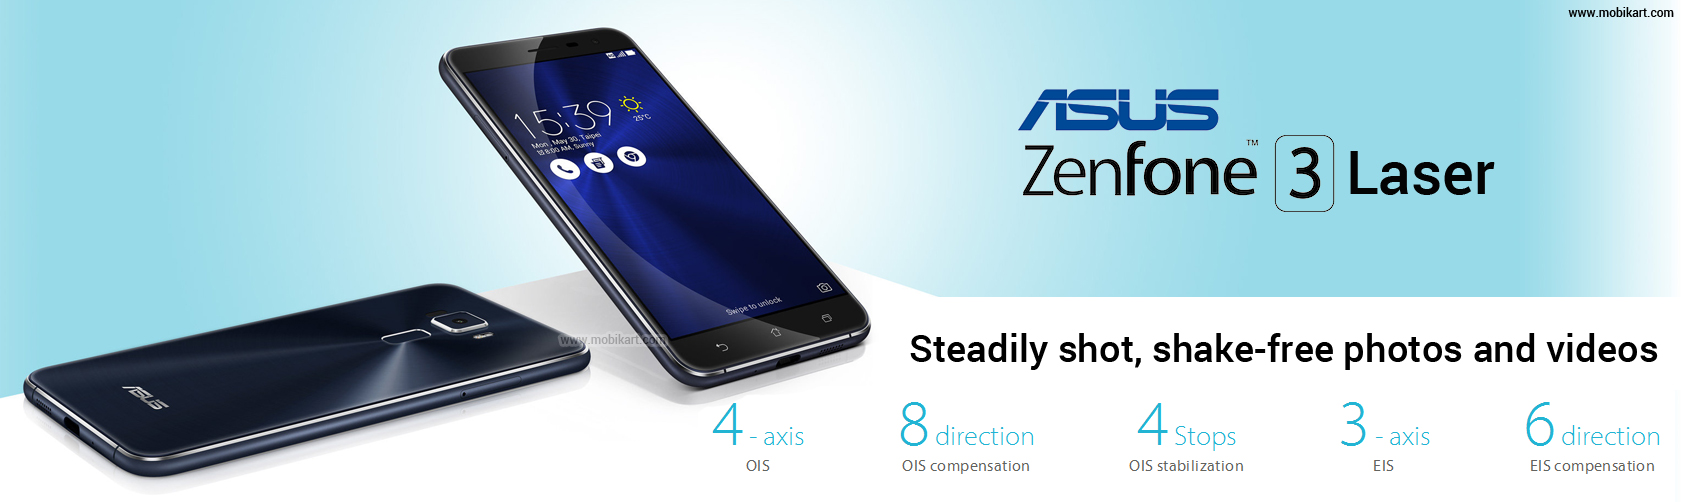 Asus Zenfone 3 Laser Is Now Official In India for Rs 18,999